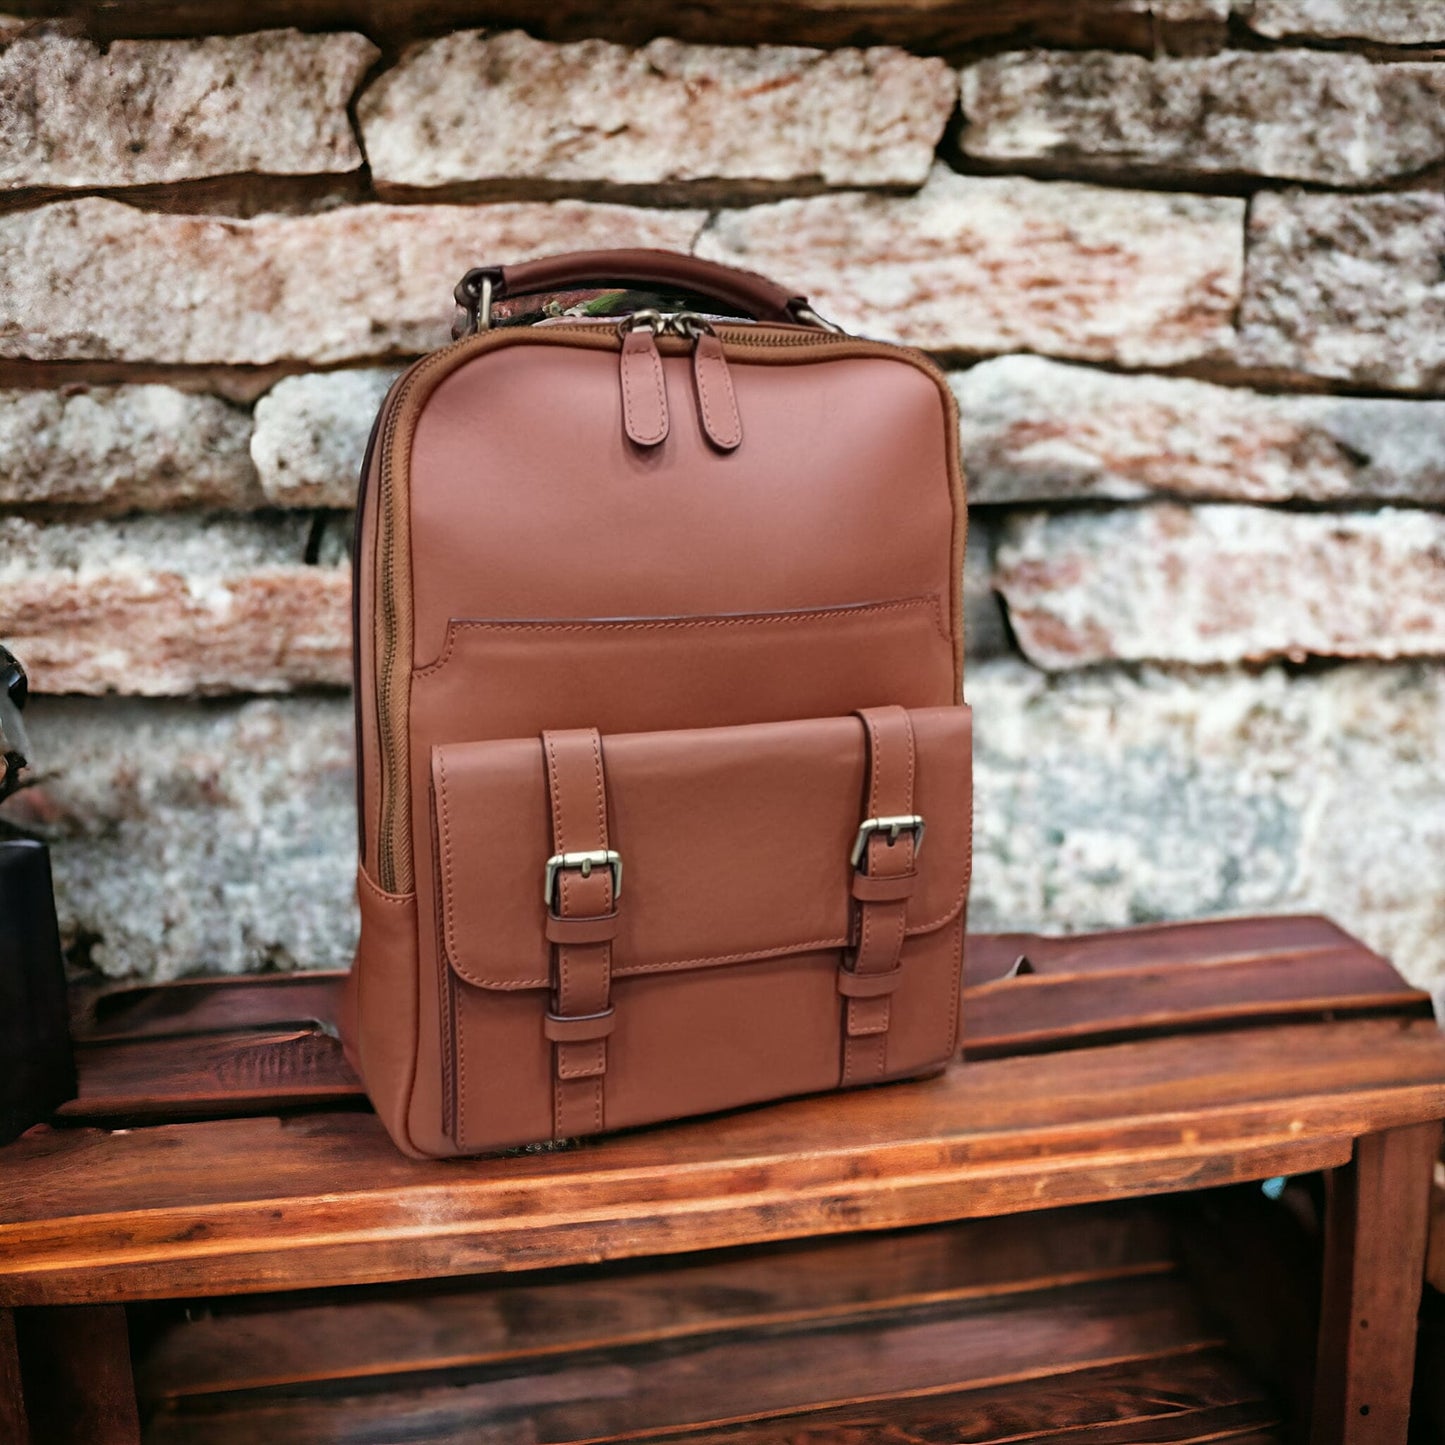 Black, Brown, Tan, Blue colors | Full Leather Handmade Daypack | 20L - 30 L options  |  Laptop pocket premimum leather, Citypack, Daily use  99percenthandmade   